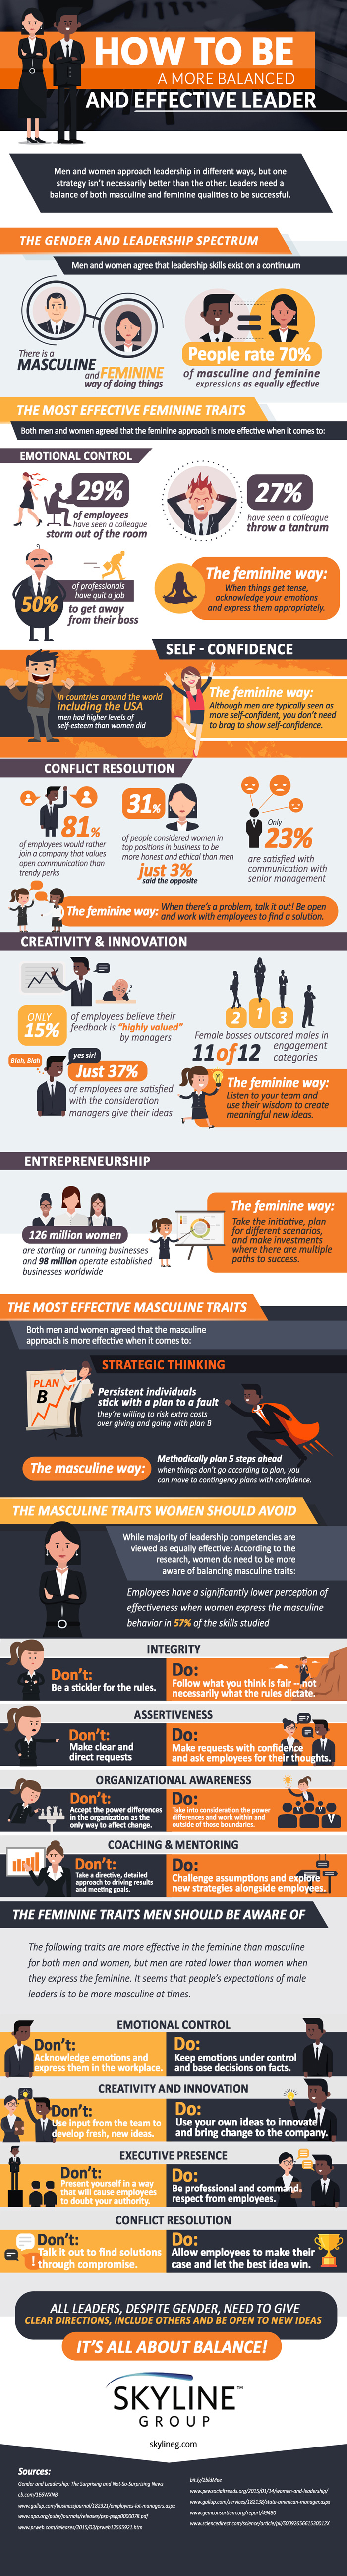 Infographic: Effective Leadership is a Balancing Act